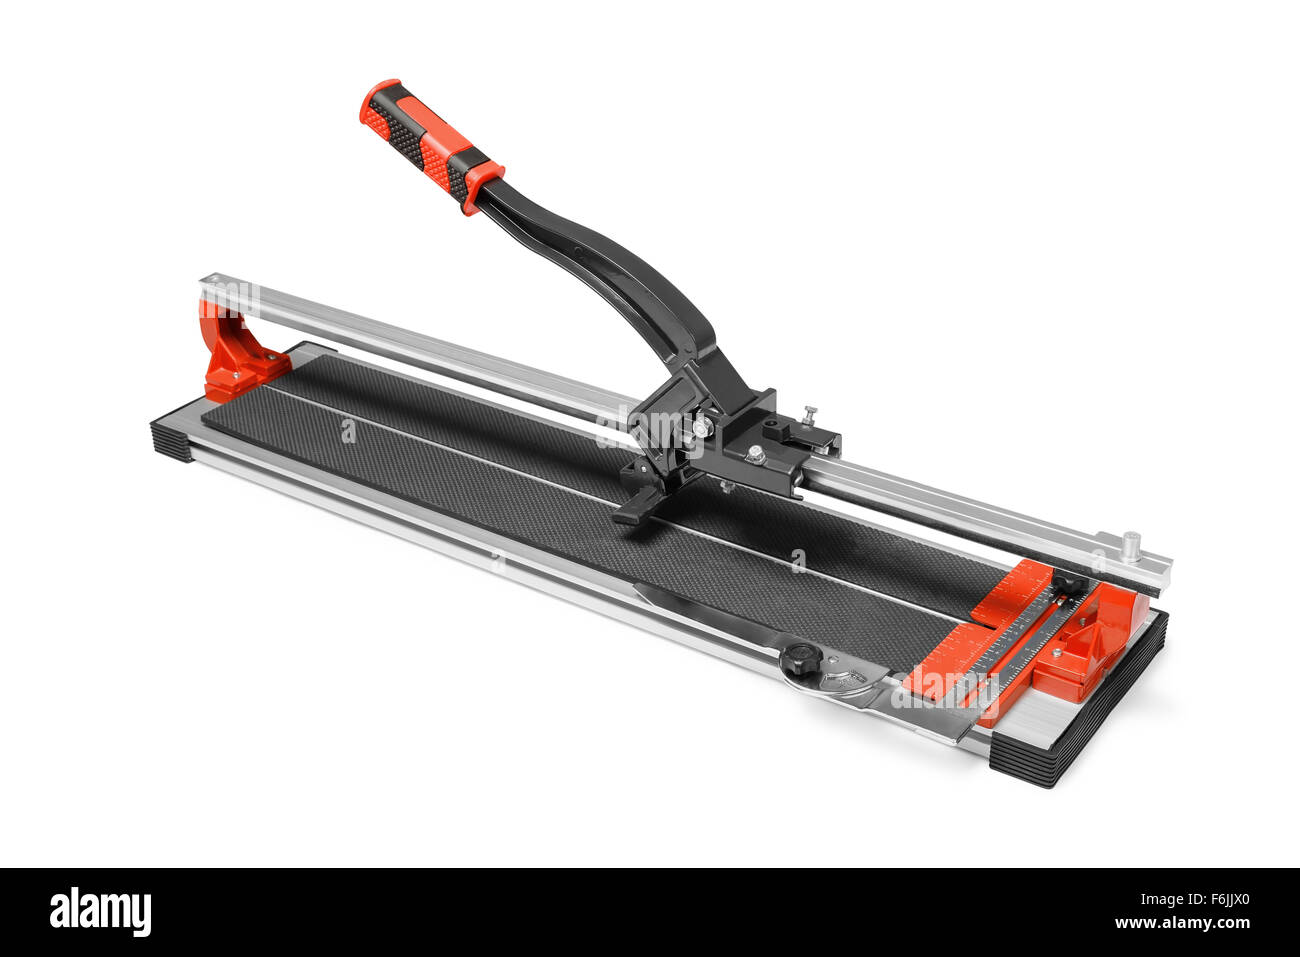 Manual tile cutter isoplated on white Stock Photo